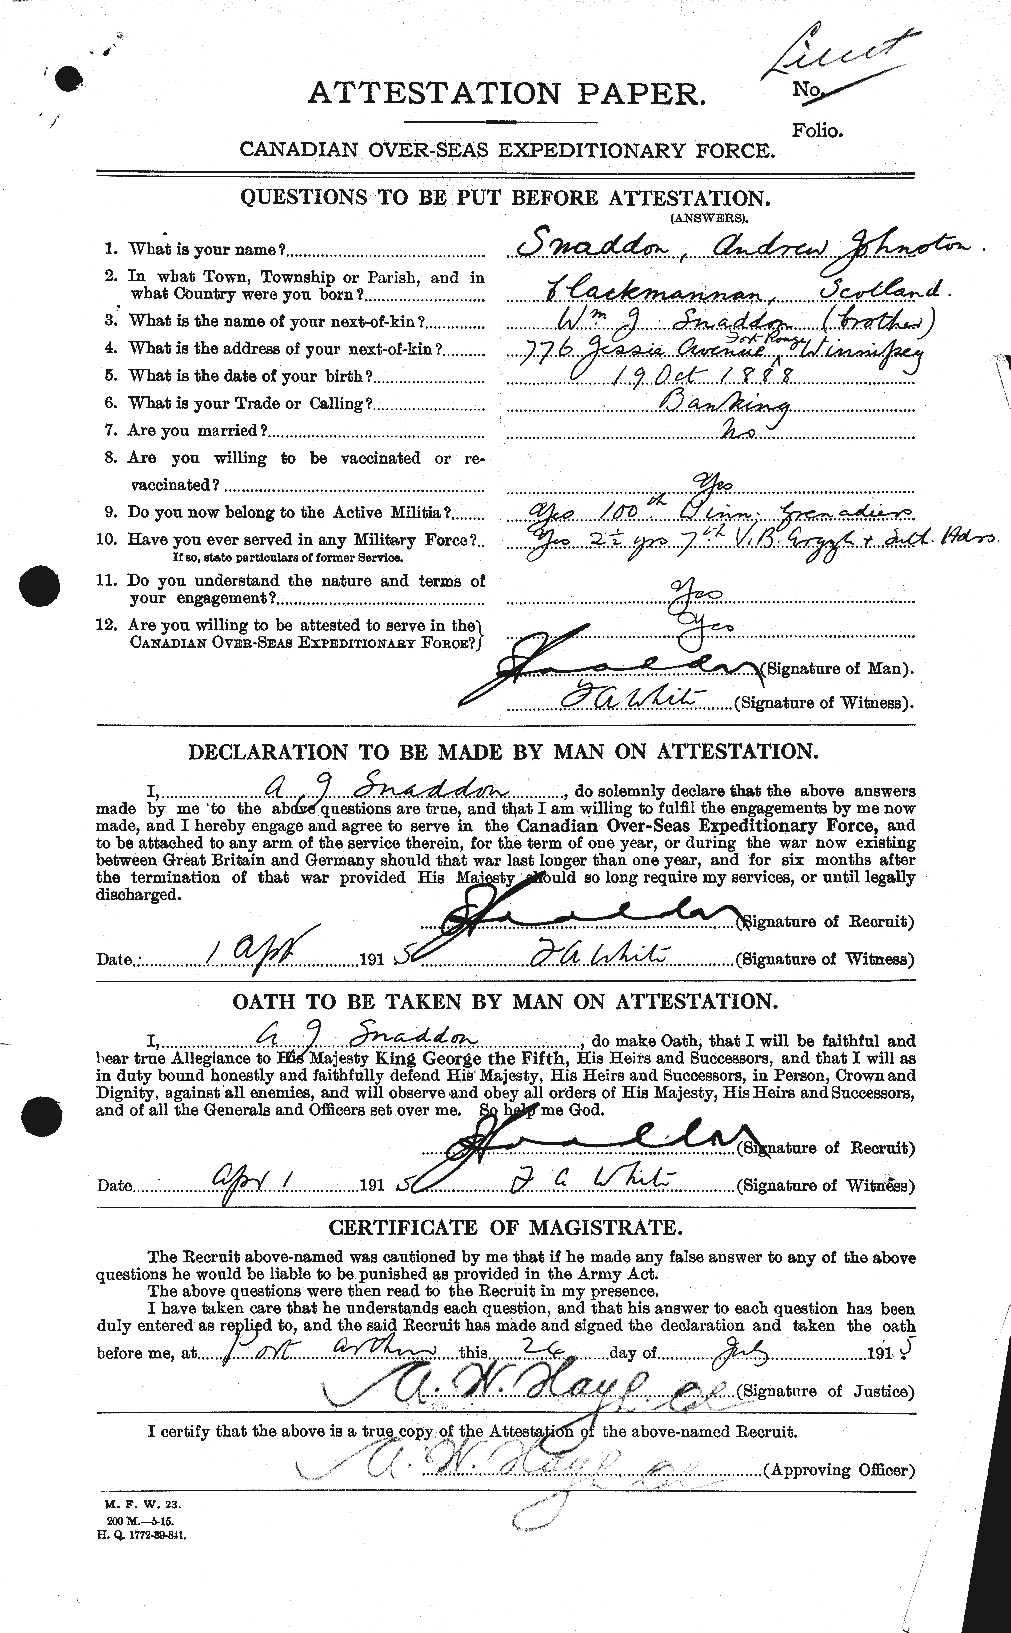 Personnel Records of the First World War - CEF 105554a